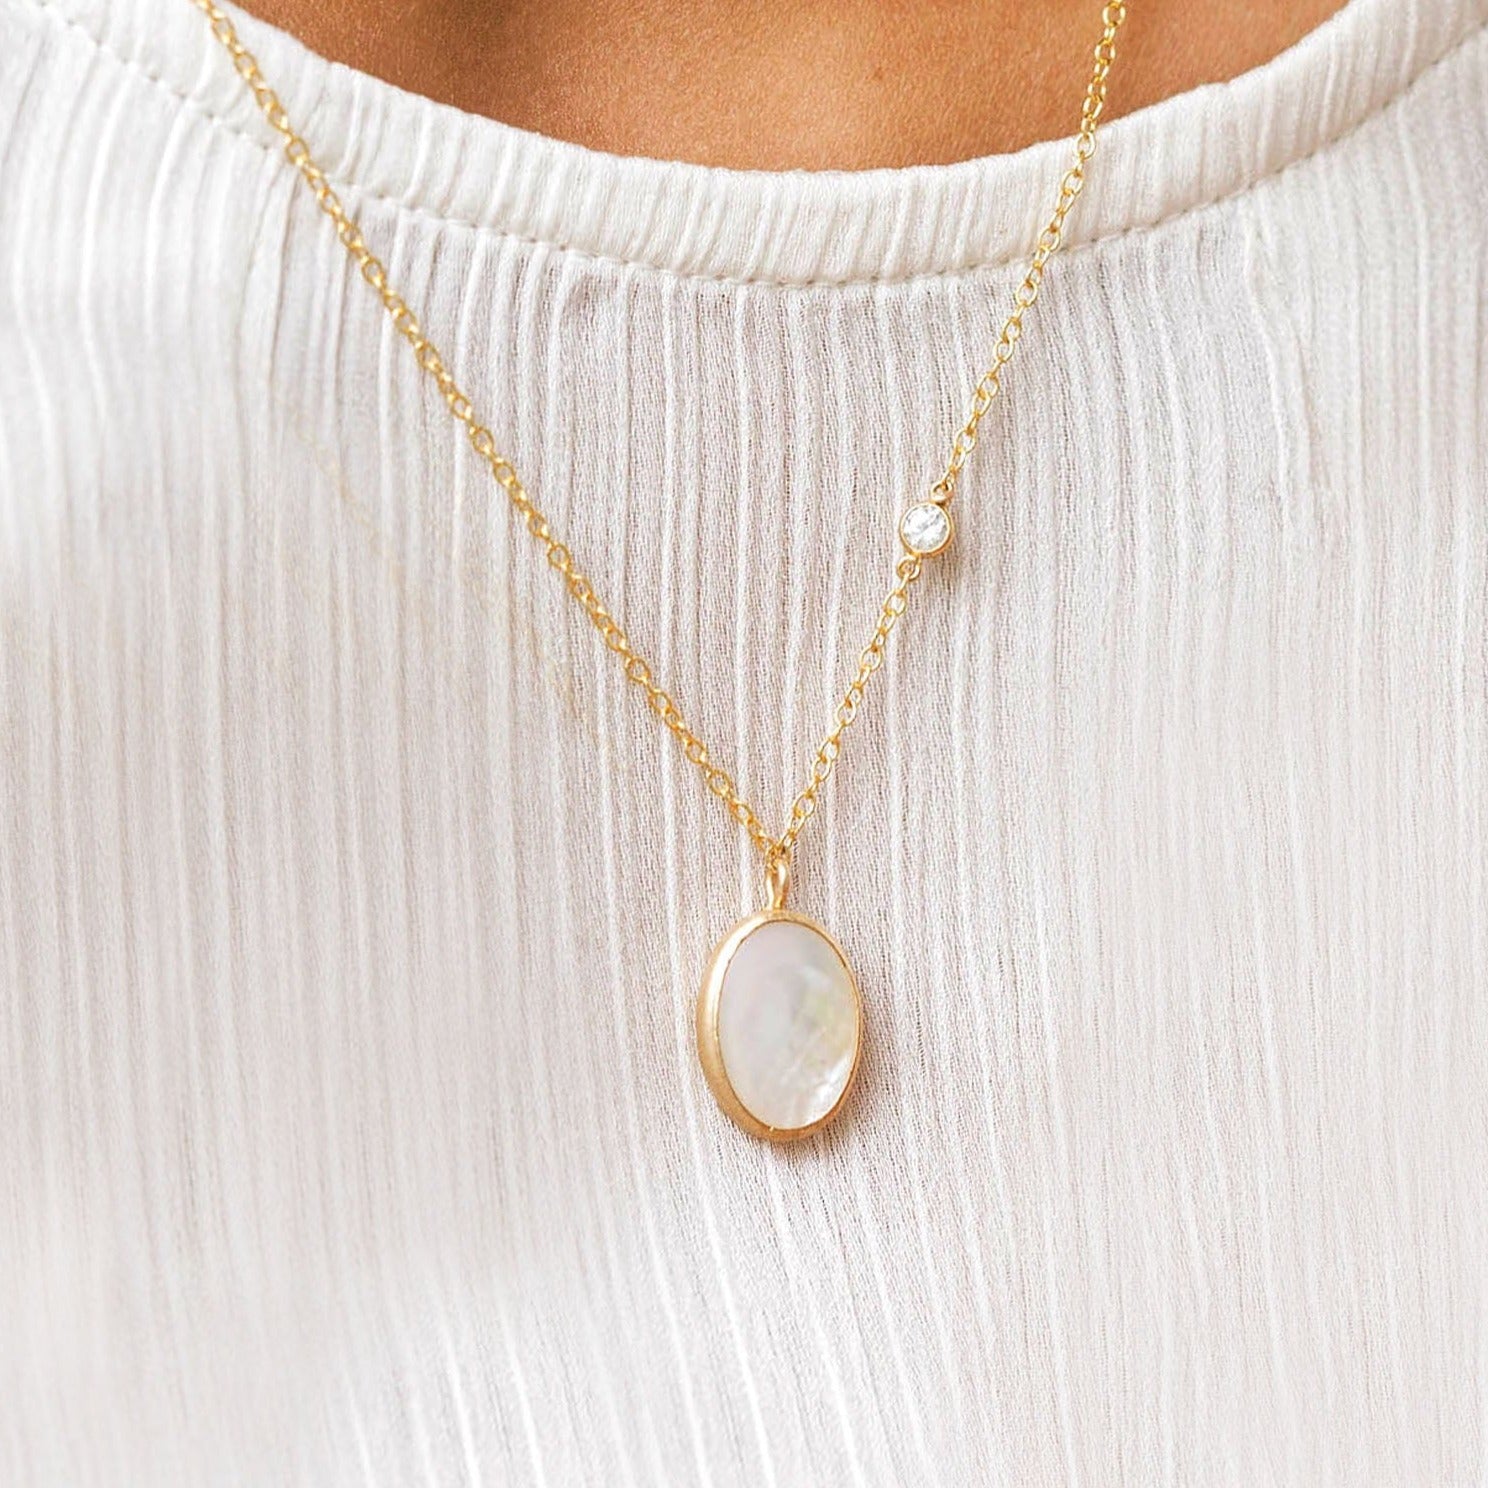 Gold Small Oval Pearl Necklace with White Topaz Gemstone